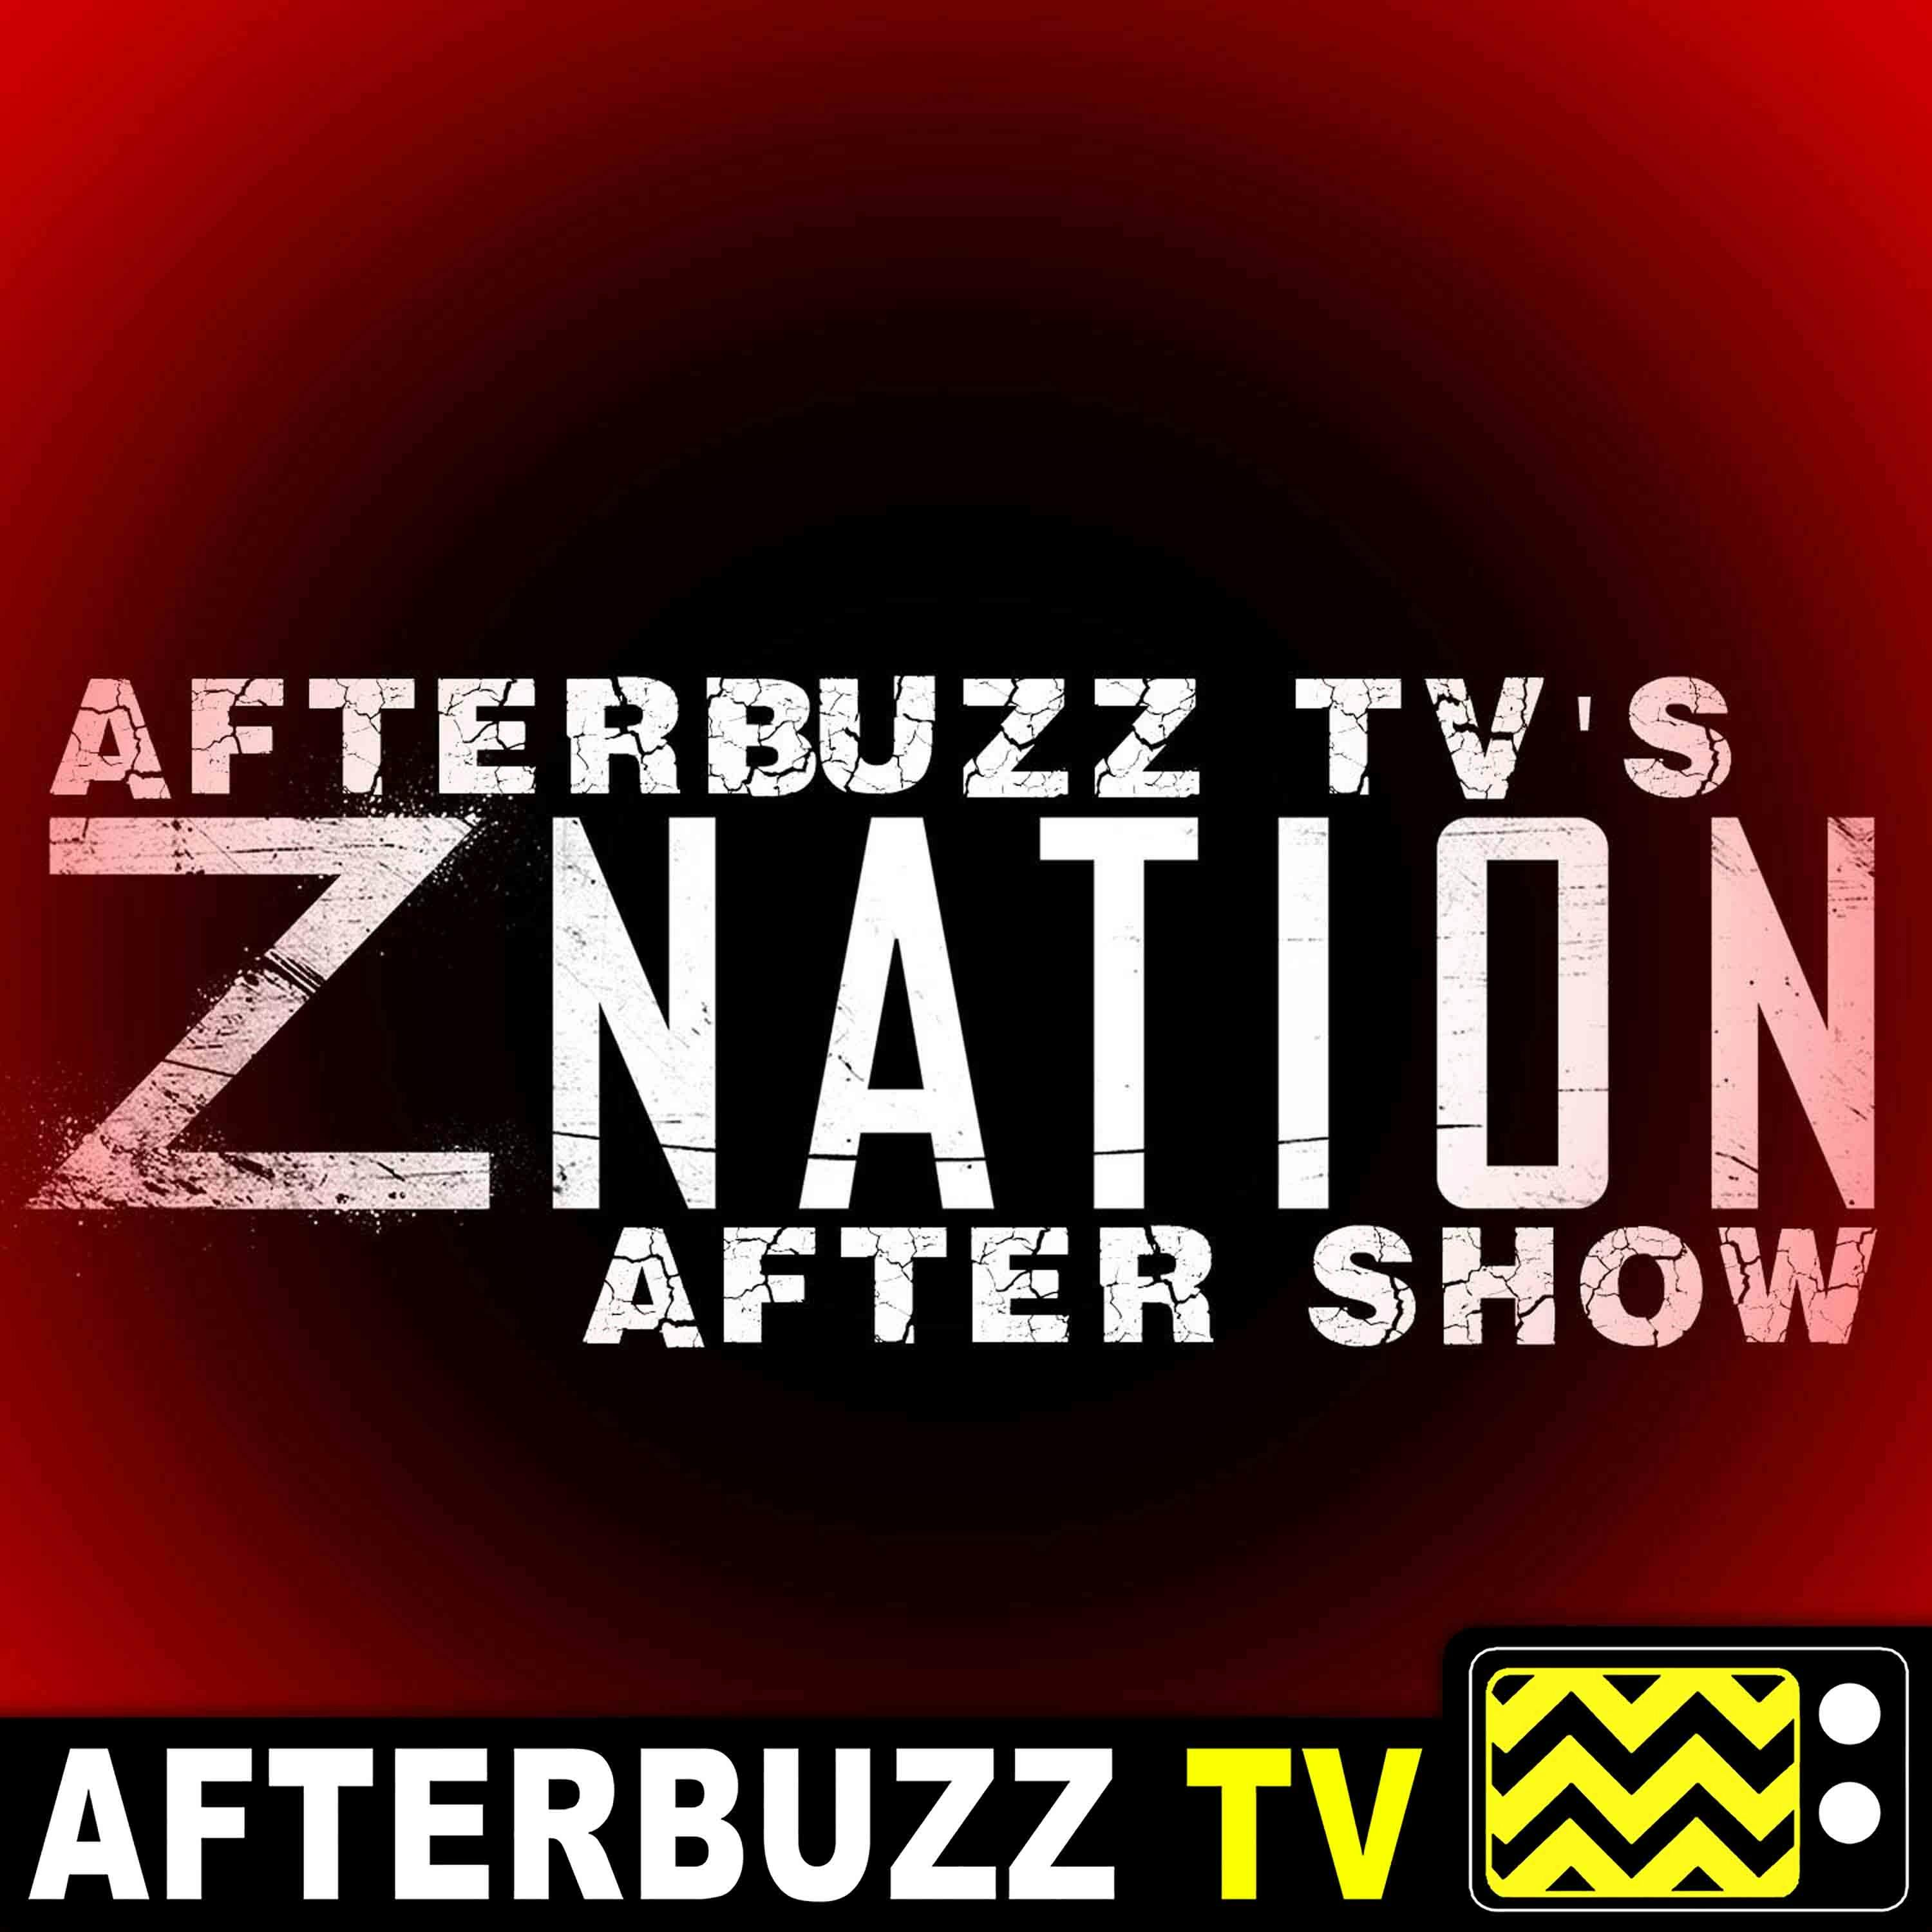 Z Nation S:4 | Michael Oaks Guests on We Interrupt This Program E:9 | AfterBuzz TV AfterShow